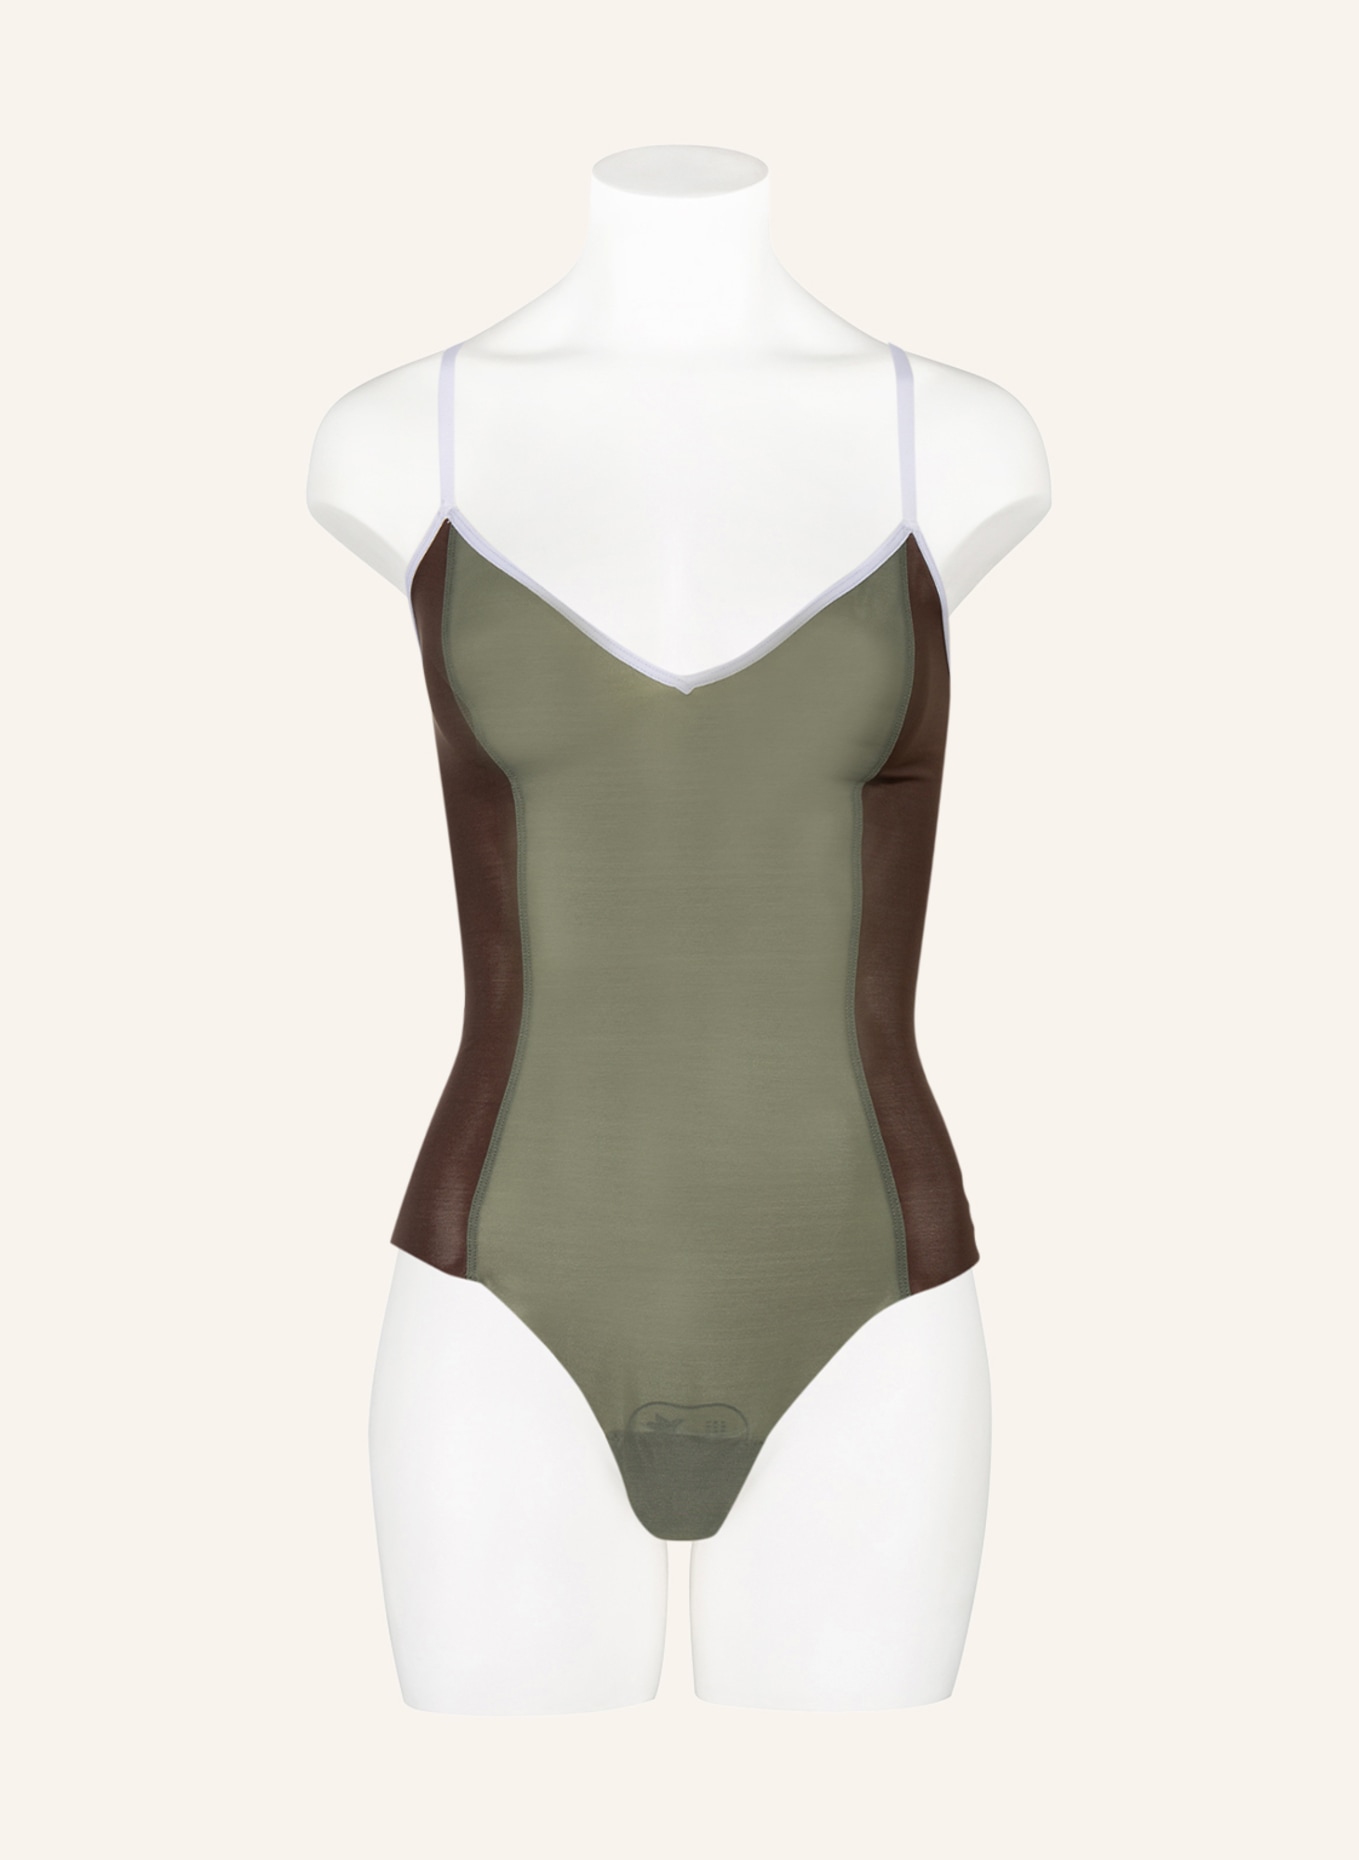 ITEM m6 Thong bodysuit ALL MESH with shaping effect, Color: OLIVE/ BROWN (Image 2)